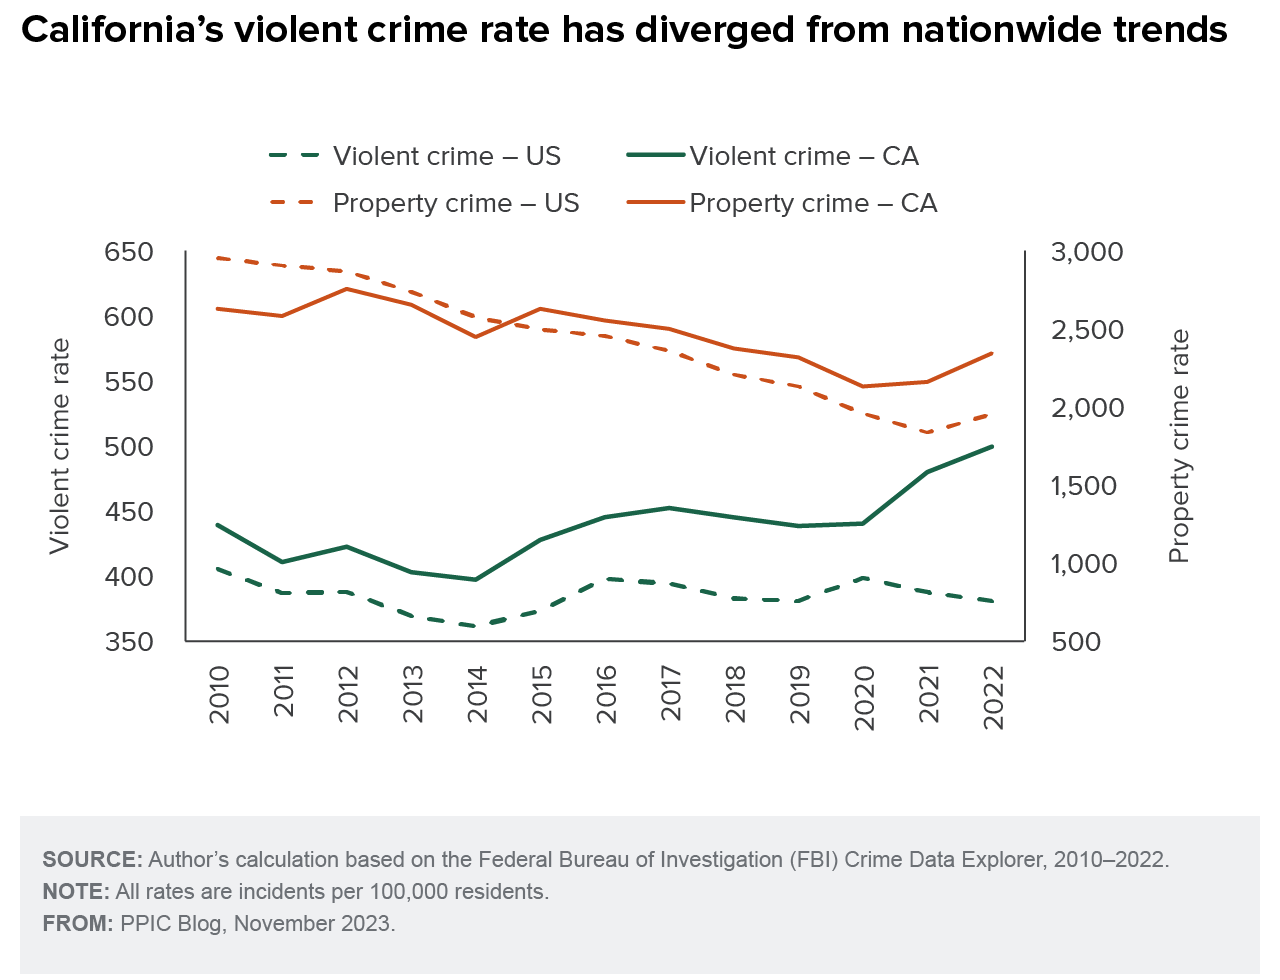 California’s Violent Crime Rate Is Diverging from the National Trend ...